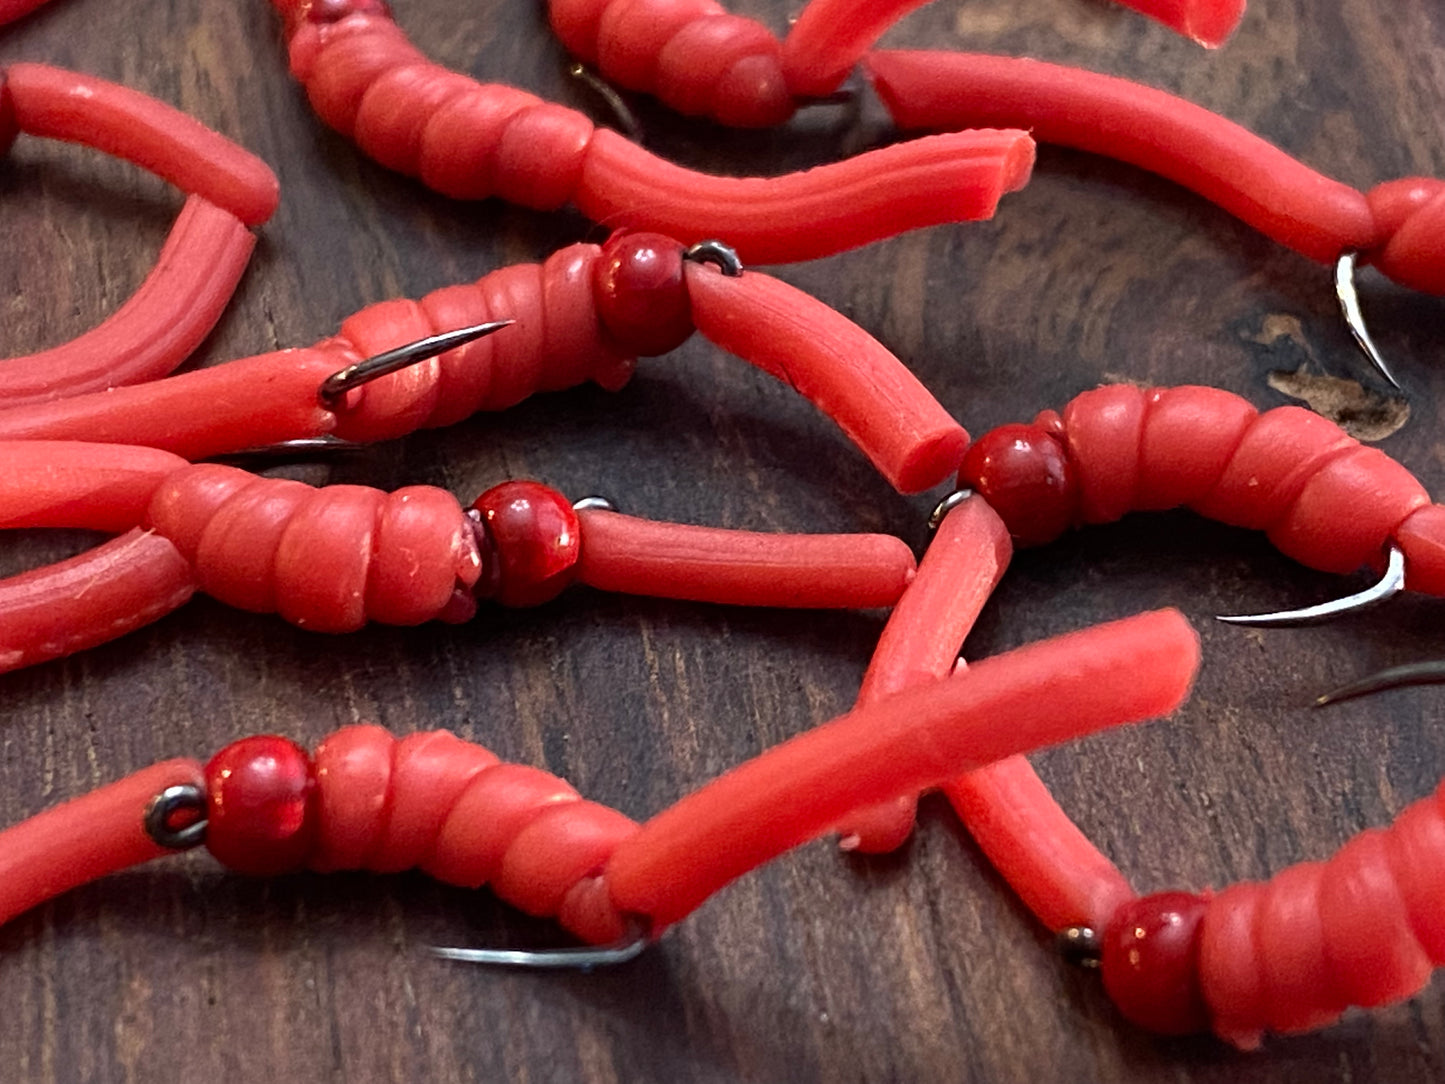 Blood red squirmy worms